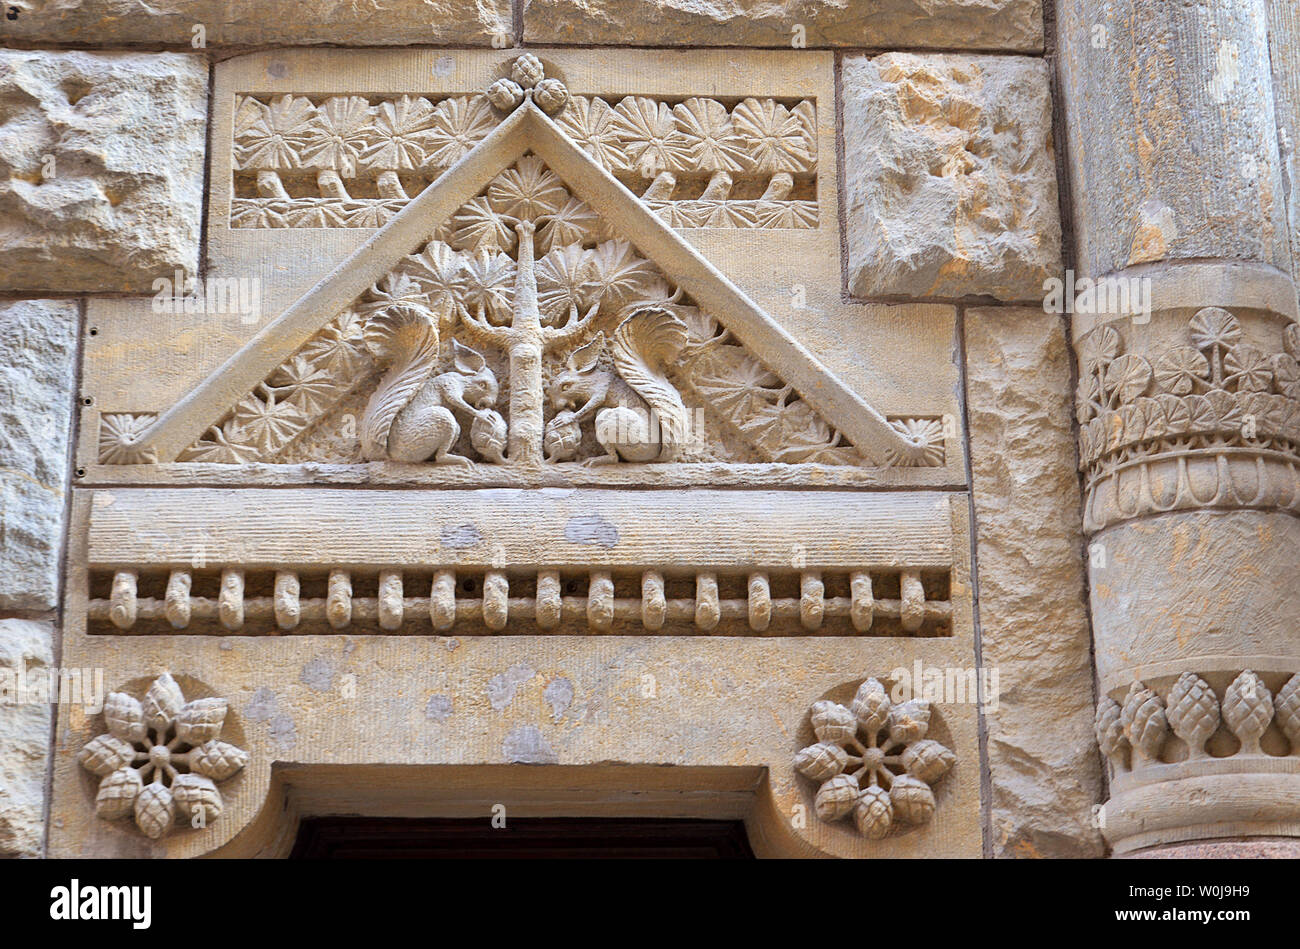 Nordic art nouveau, Finnish national romantic style, floral and animal motifs carved on a building in Helsinki, Finland Stock Photo